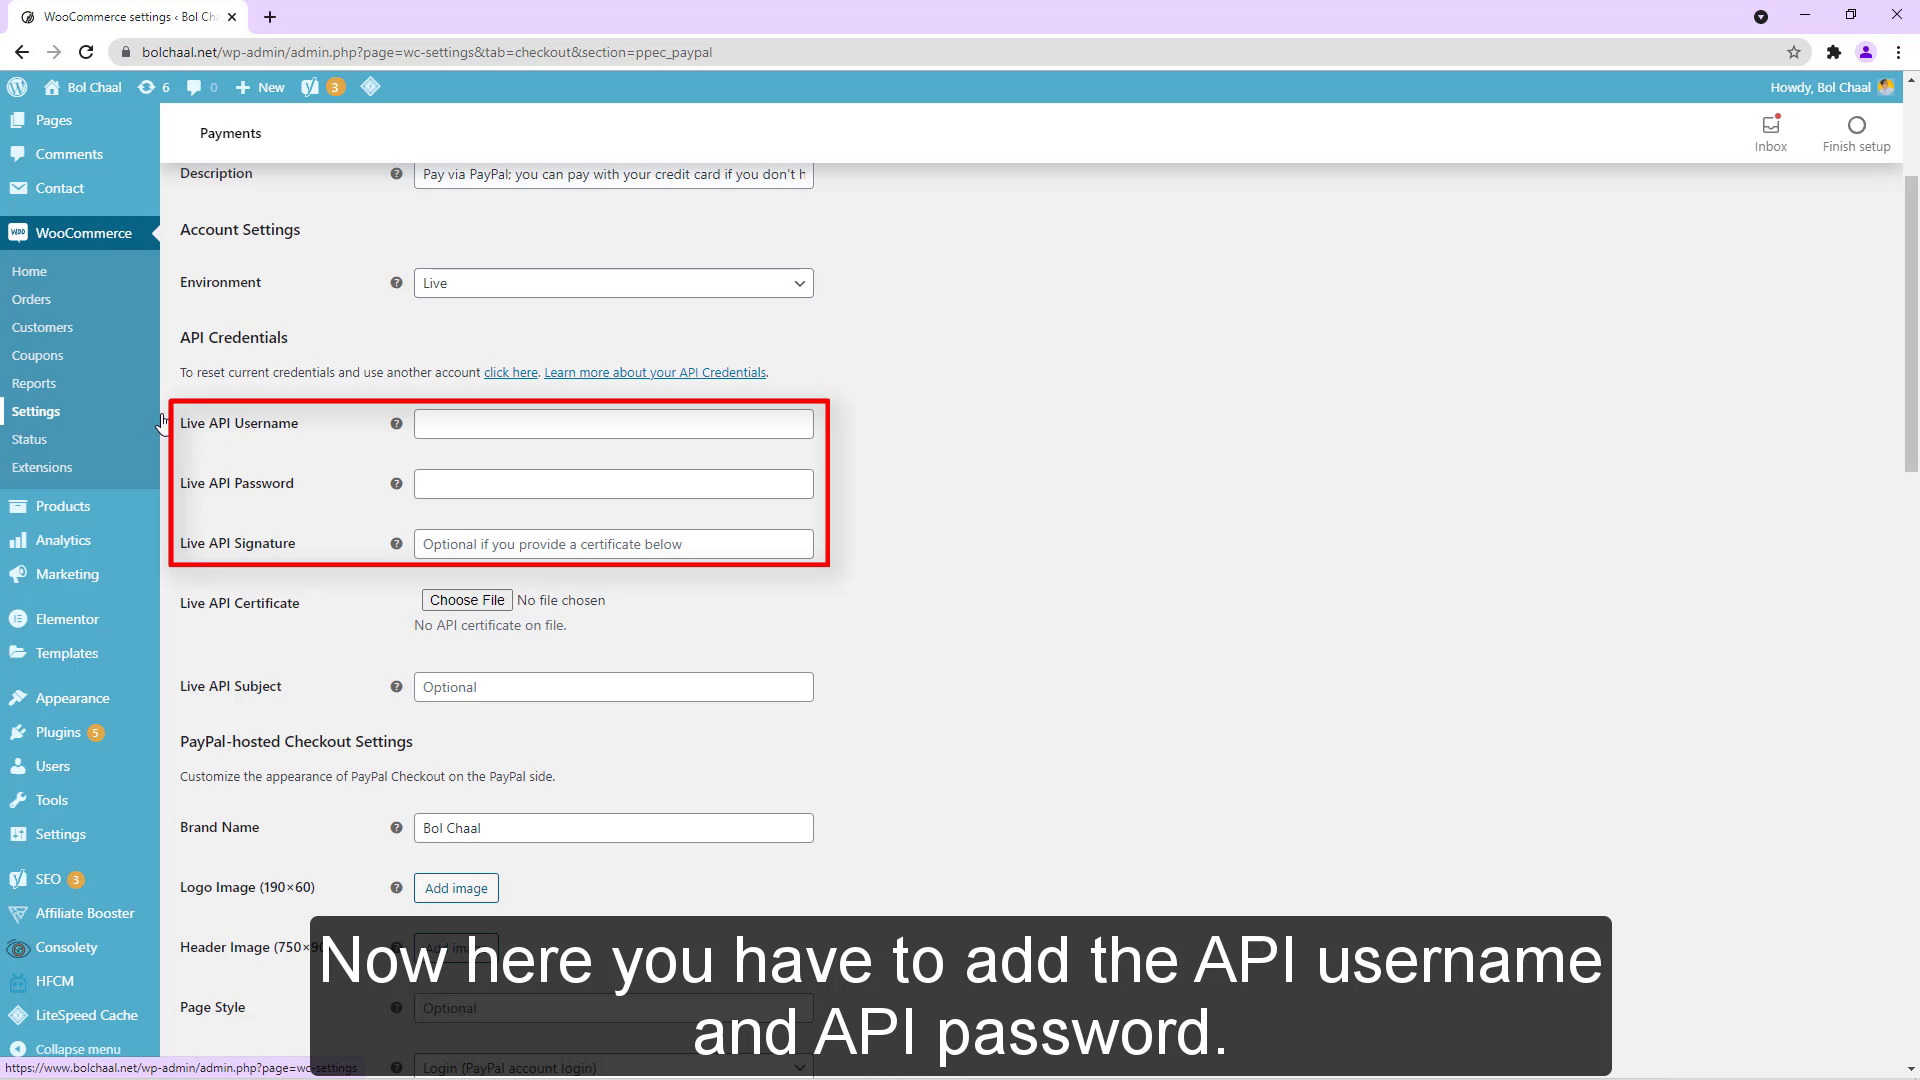 Now here you have to add the API username and API password